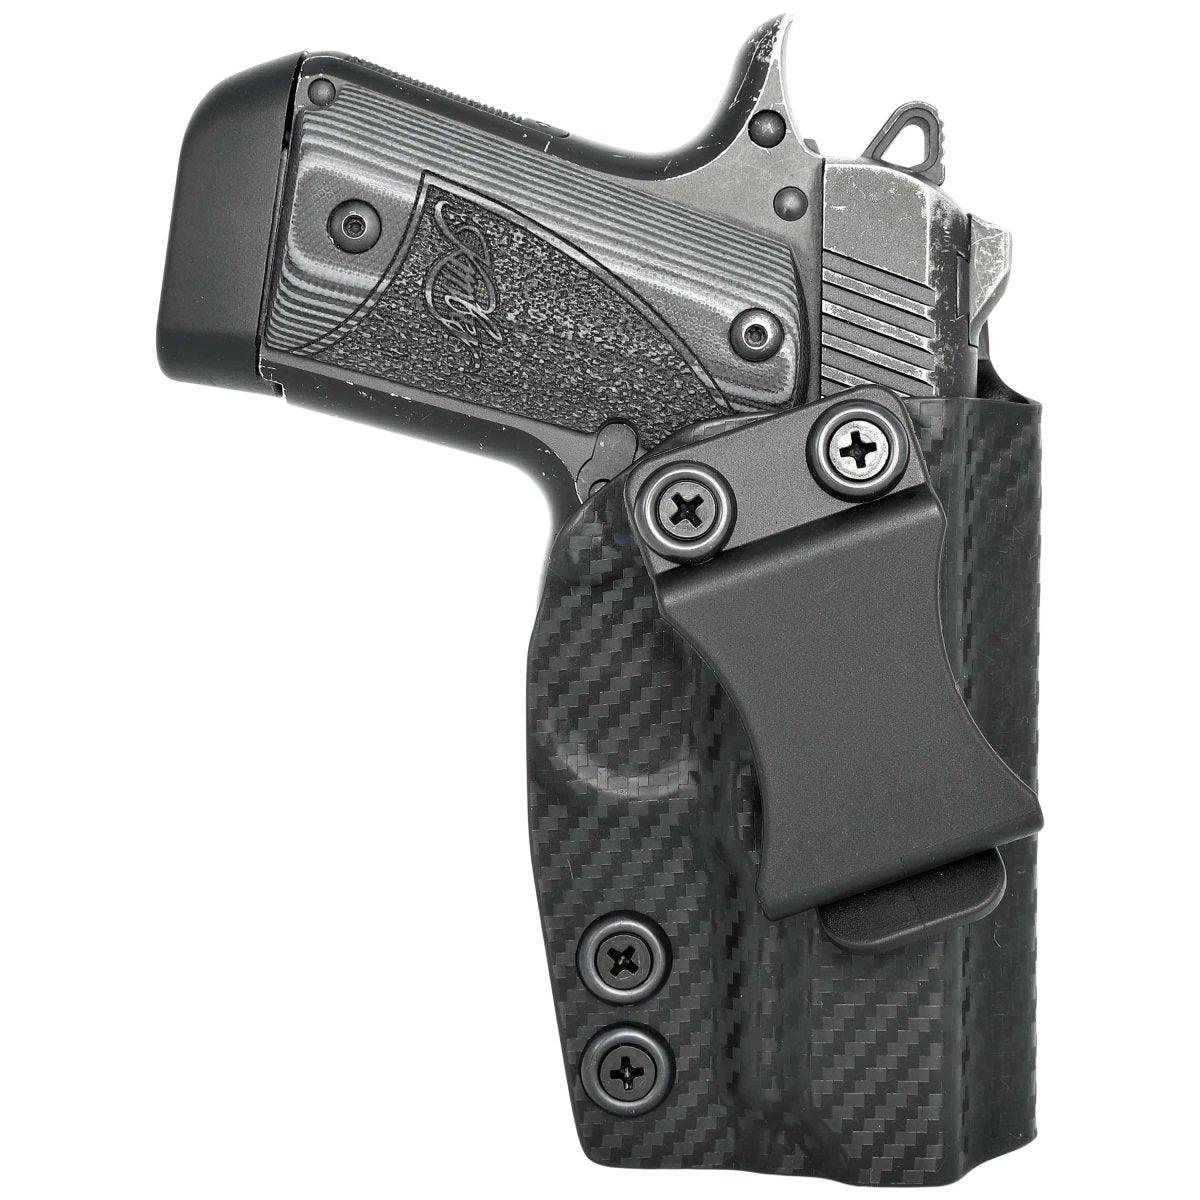 MICRO 9 HOLSTERS